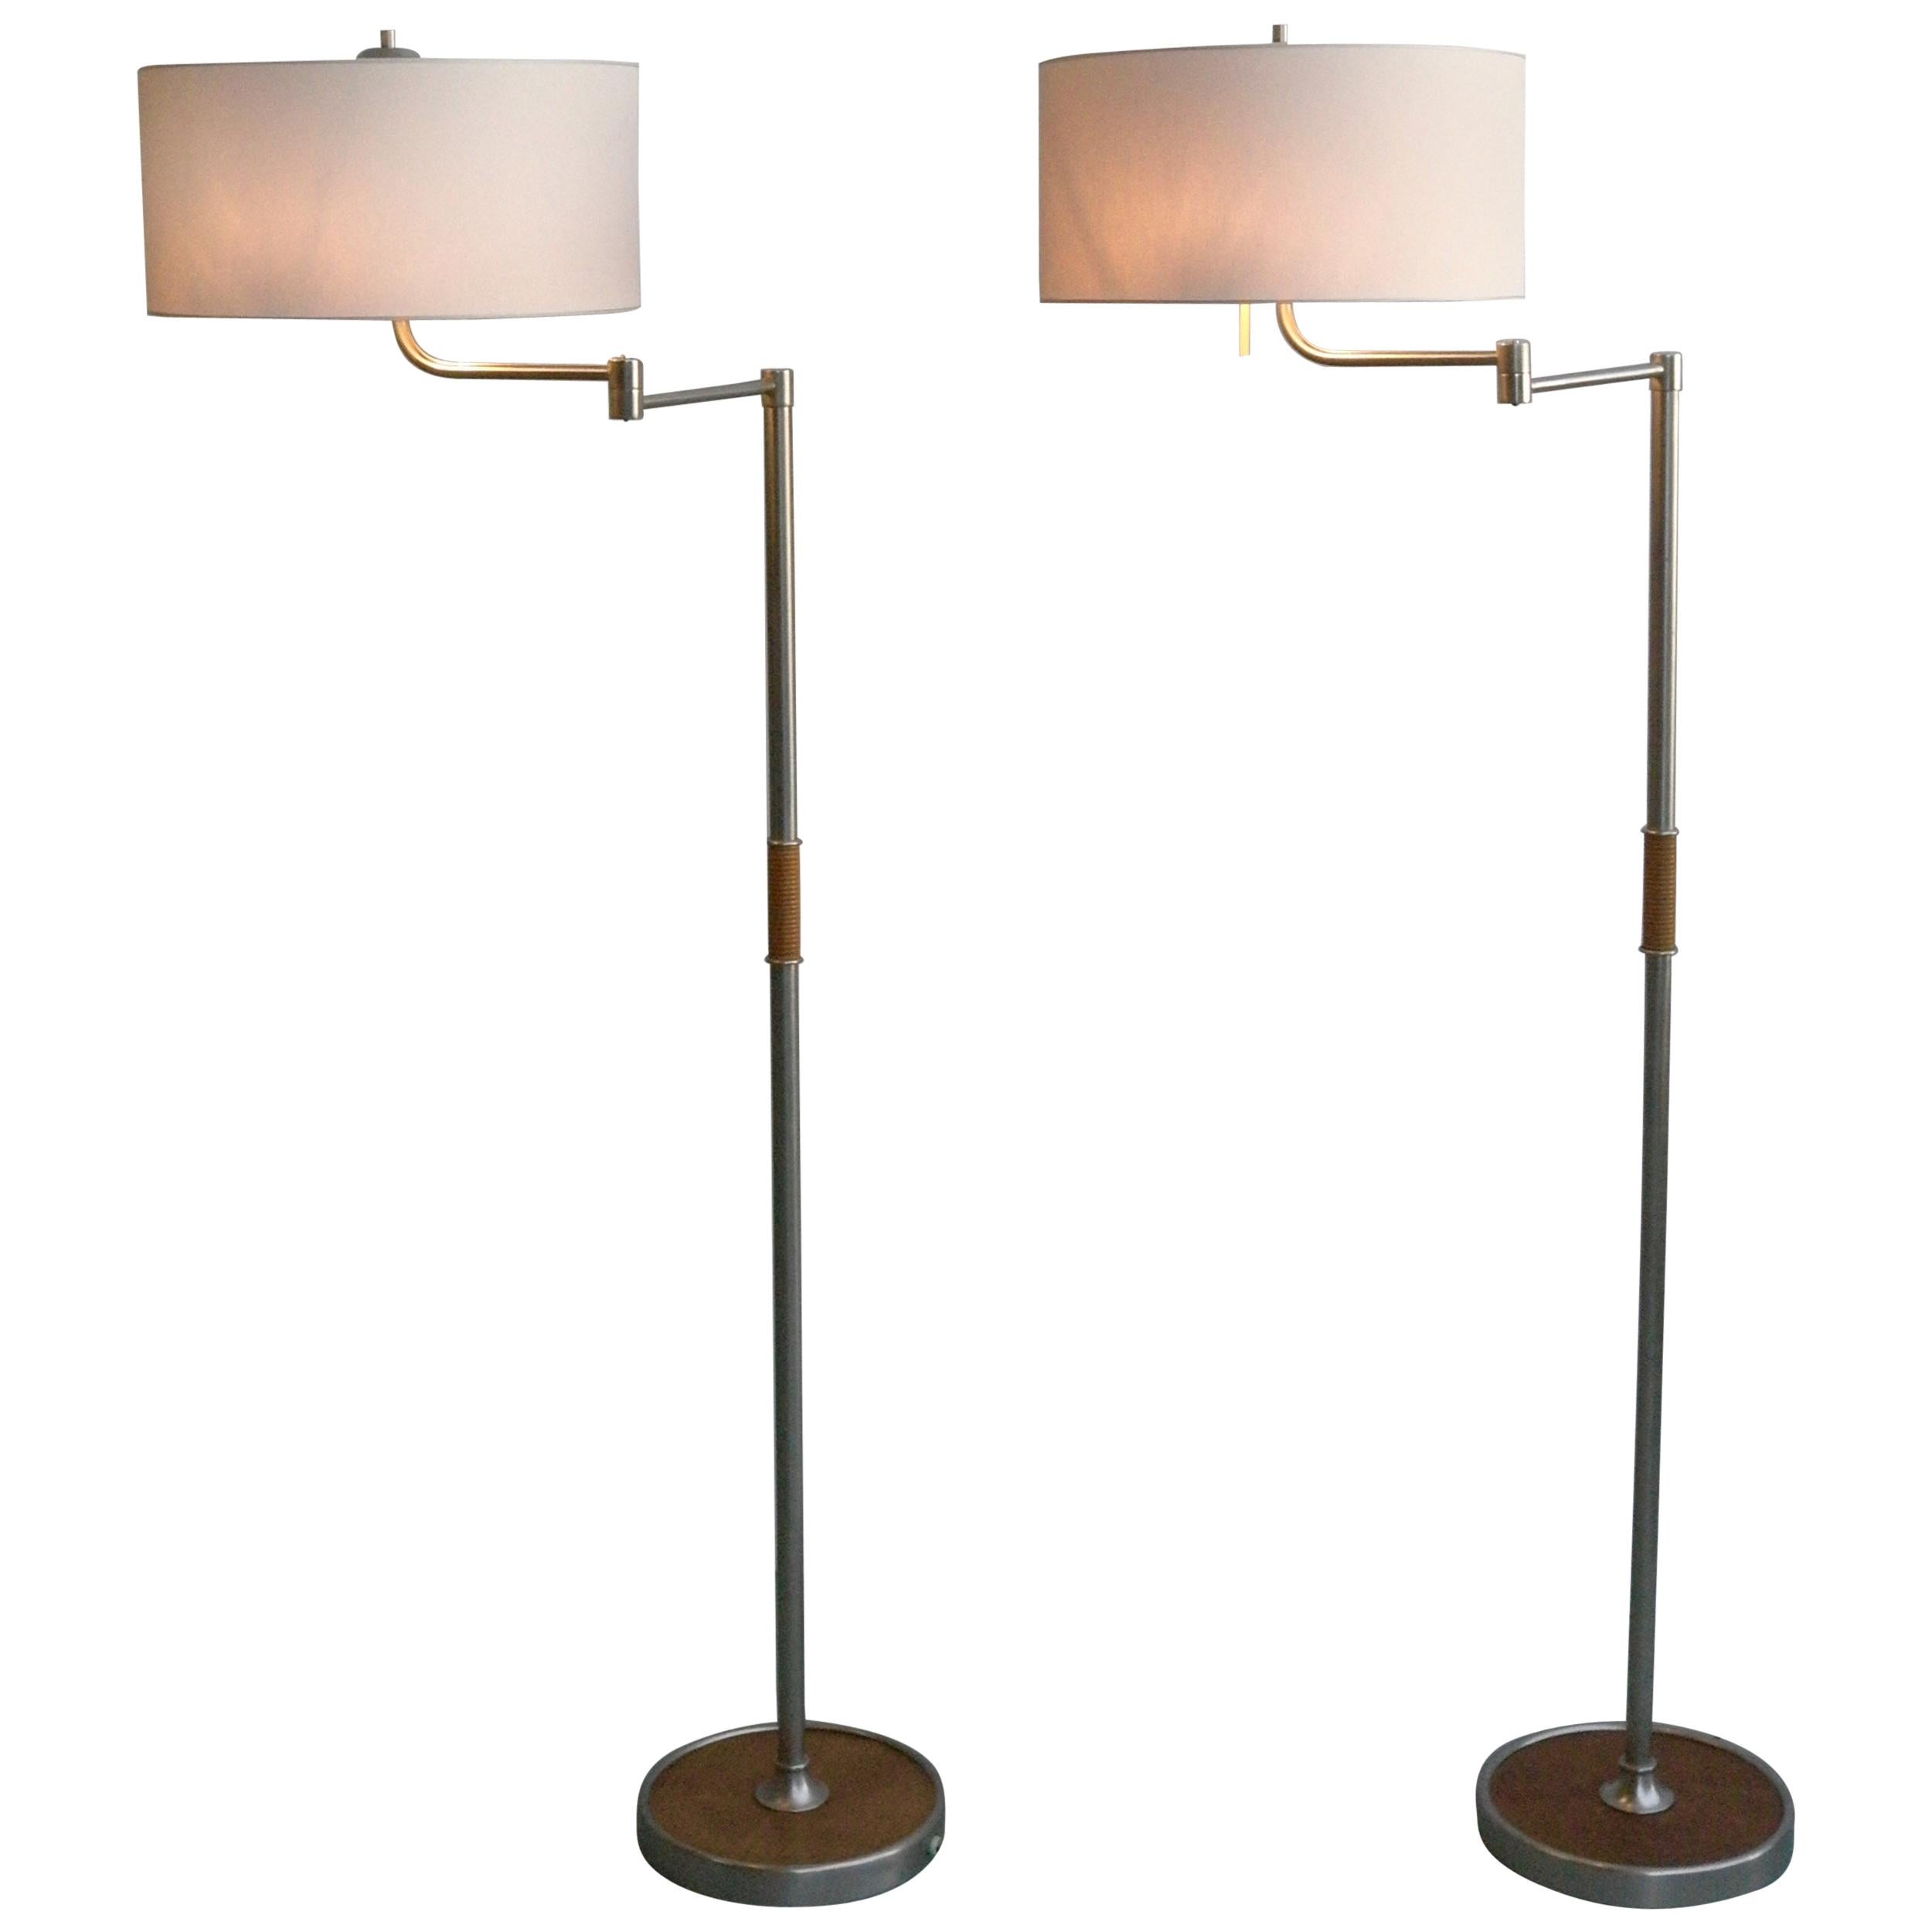 Pair of Midcentury Swing-Arm Floor Lamps in Metal with Faux Bamboo Wood Details